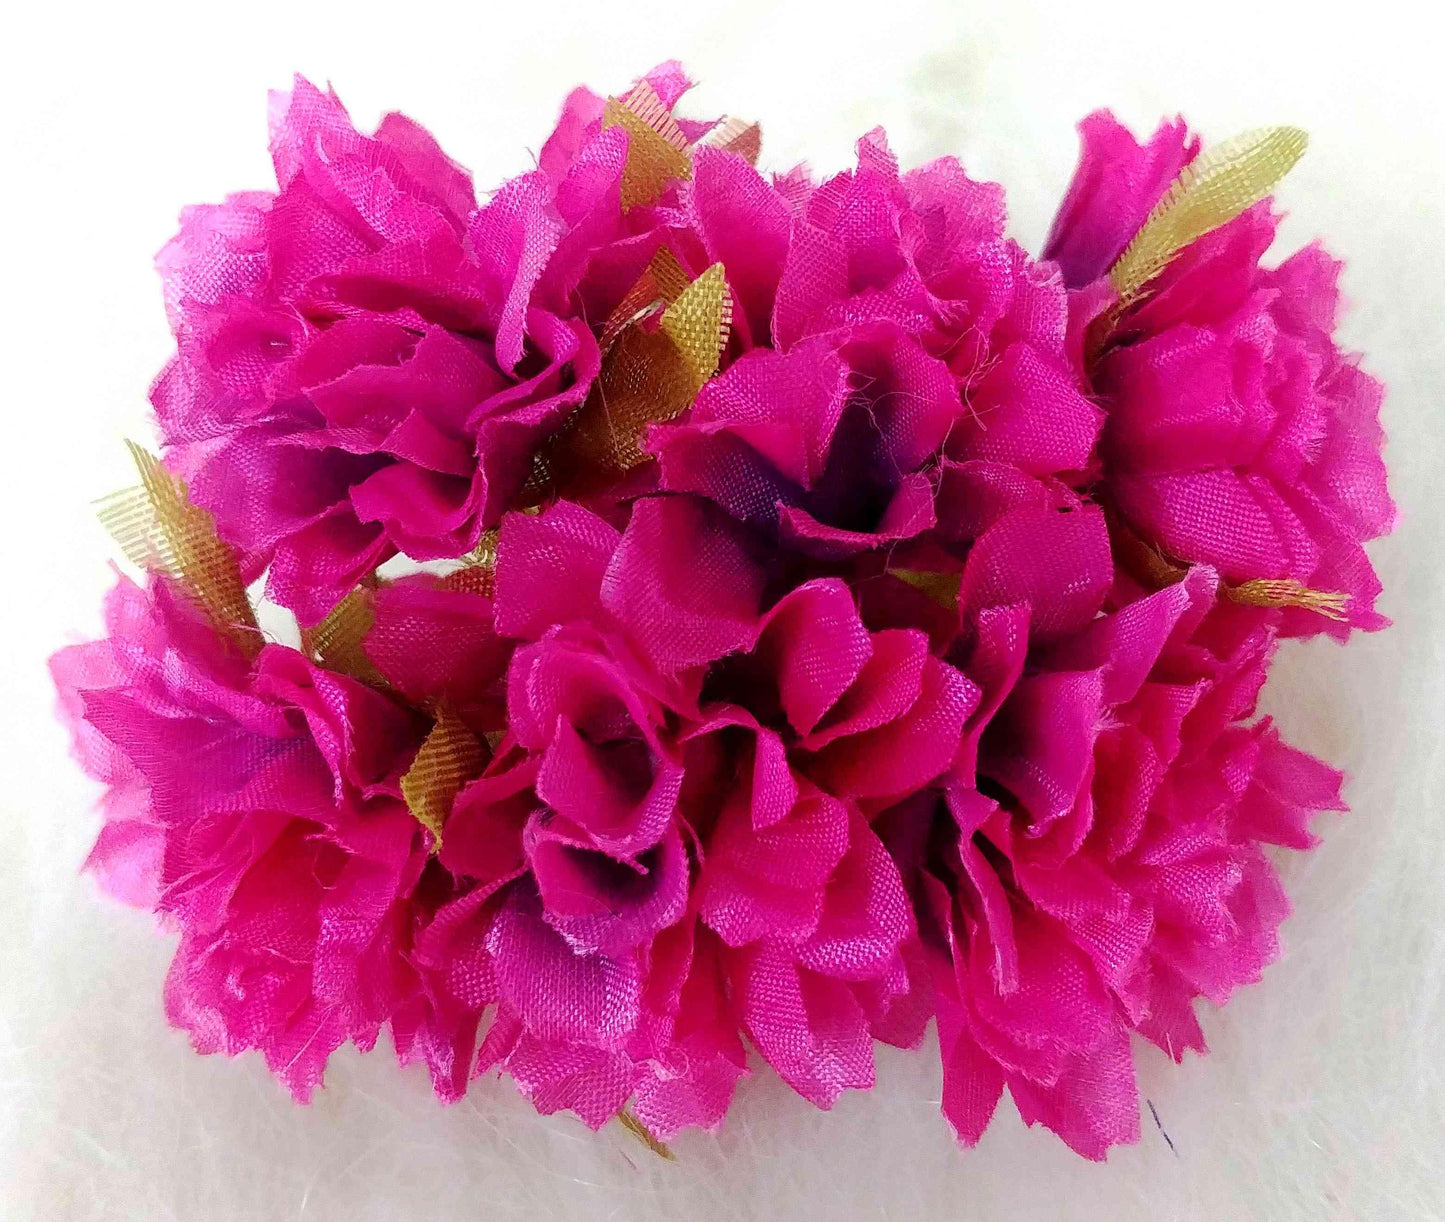 Indian Petals Beautiful Fabric Flowers for DIY Craft, Trouseau Packing or Decoration (Bunch of 12) - Design 8 - Indian Petals